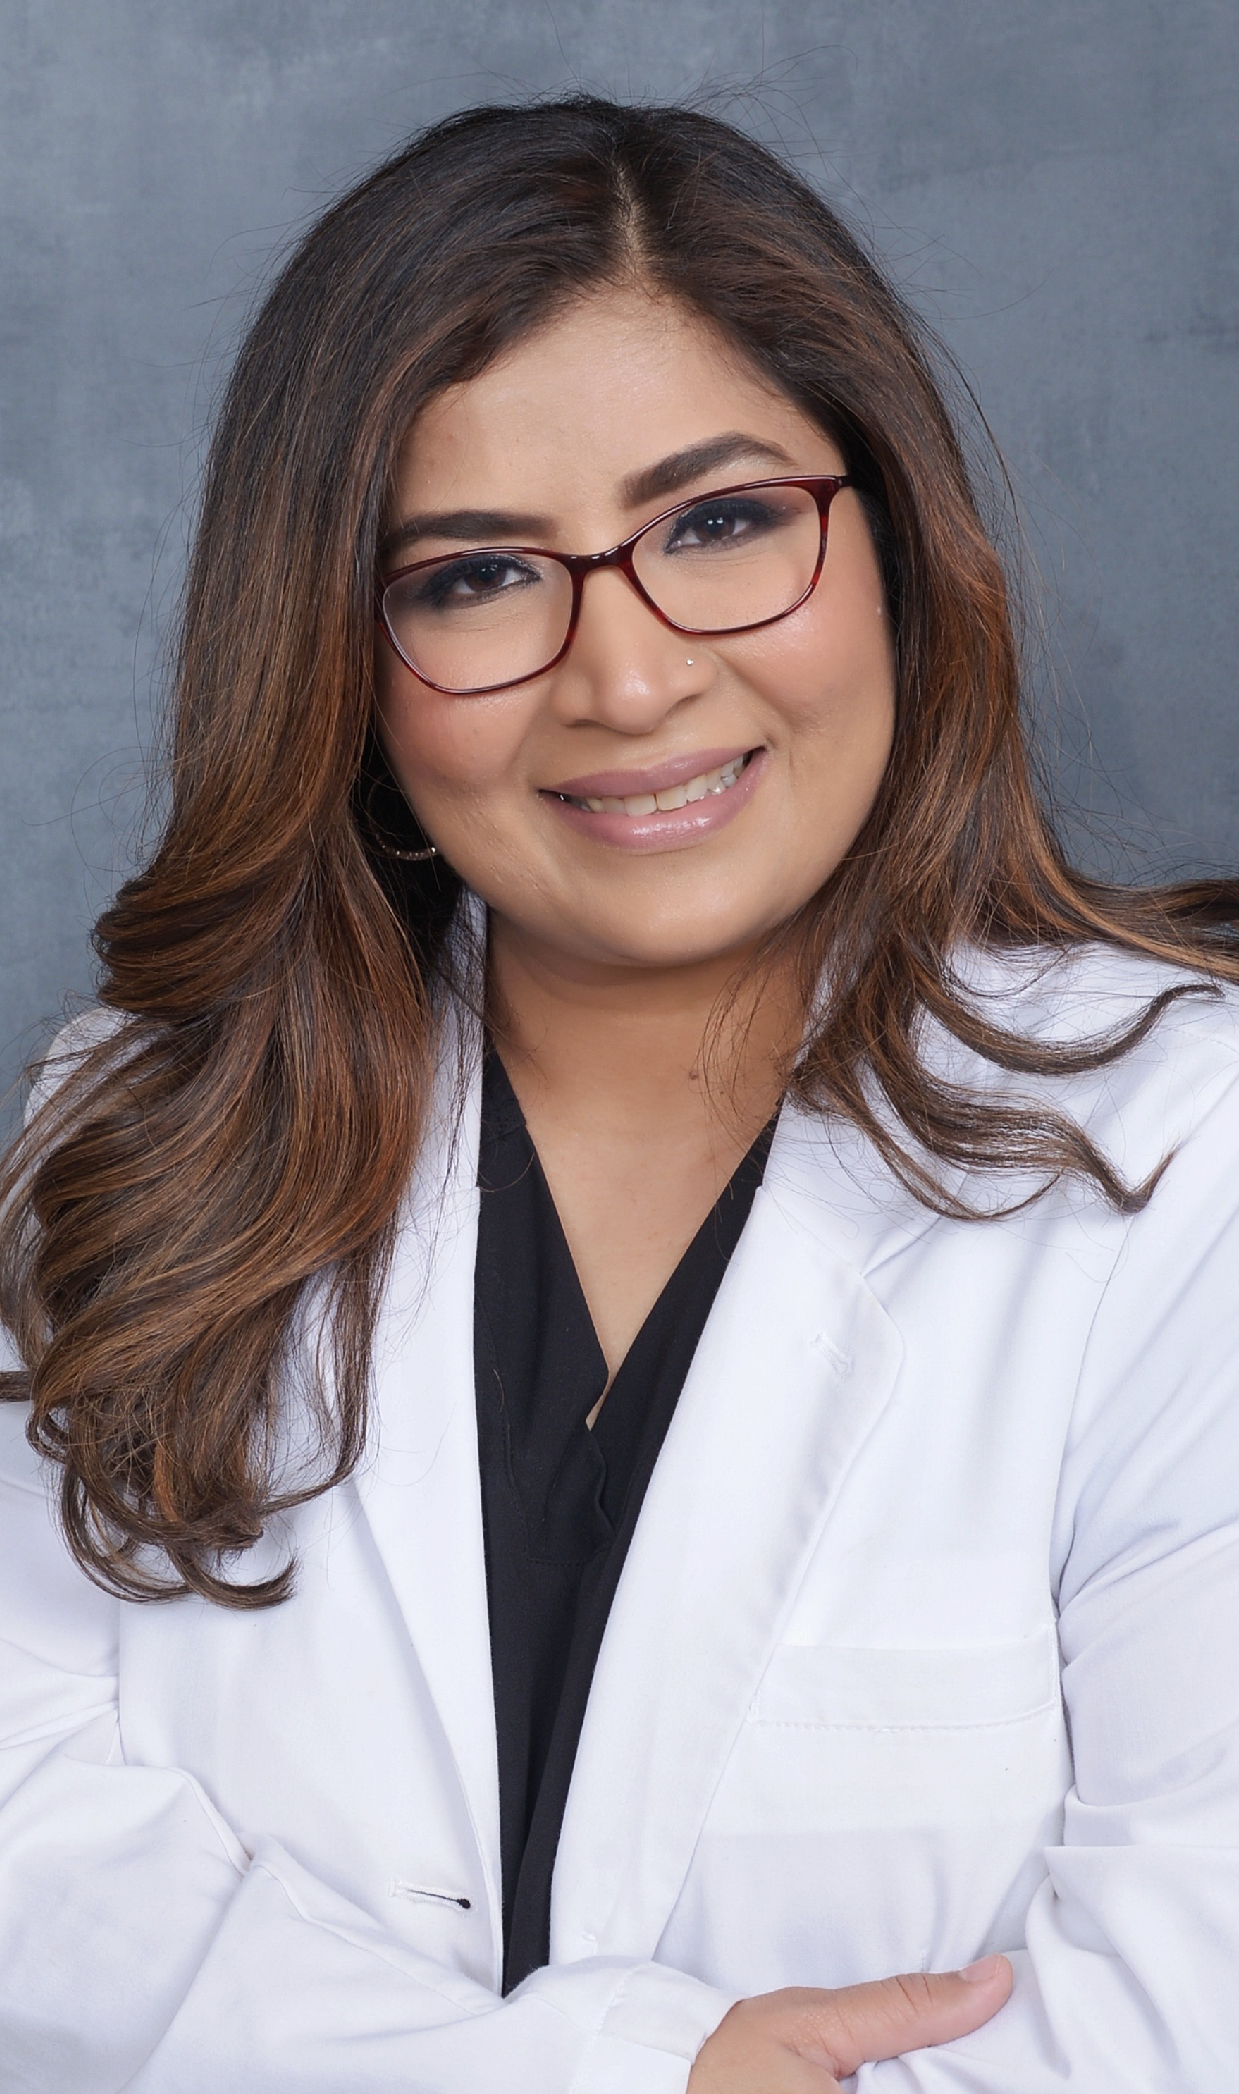 Dr. Farhat Shaikh - Primary Care Physician in Frisco TX